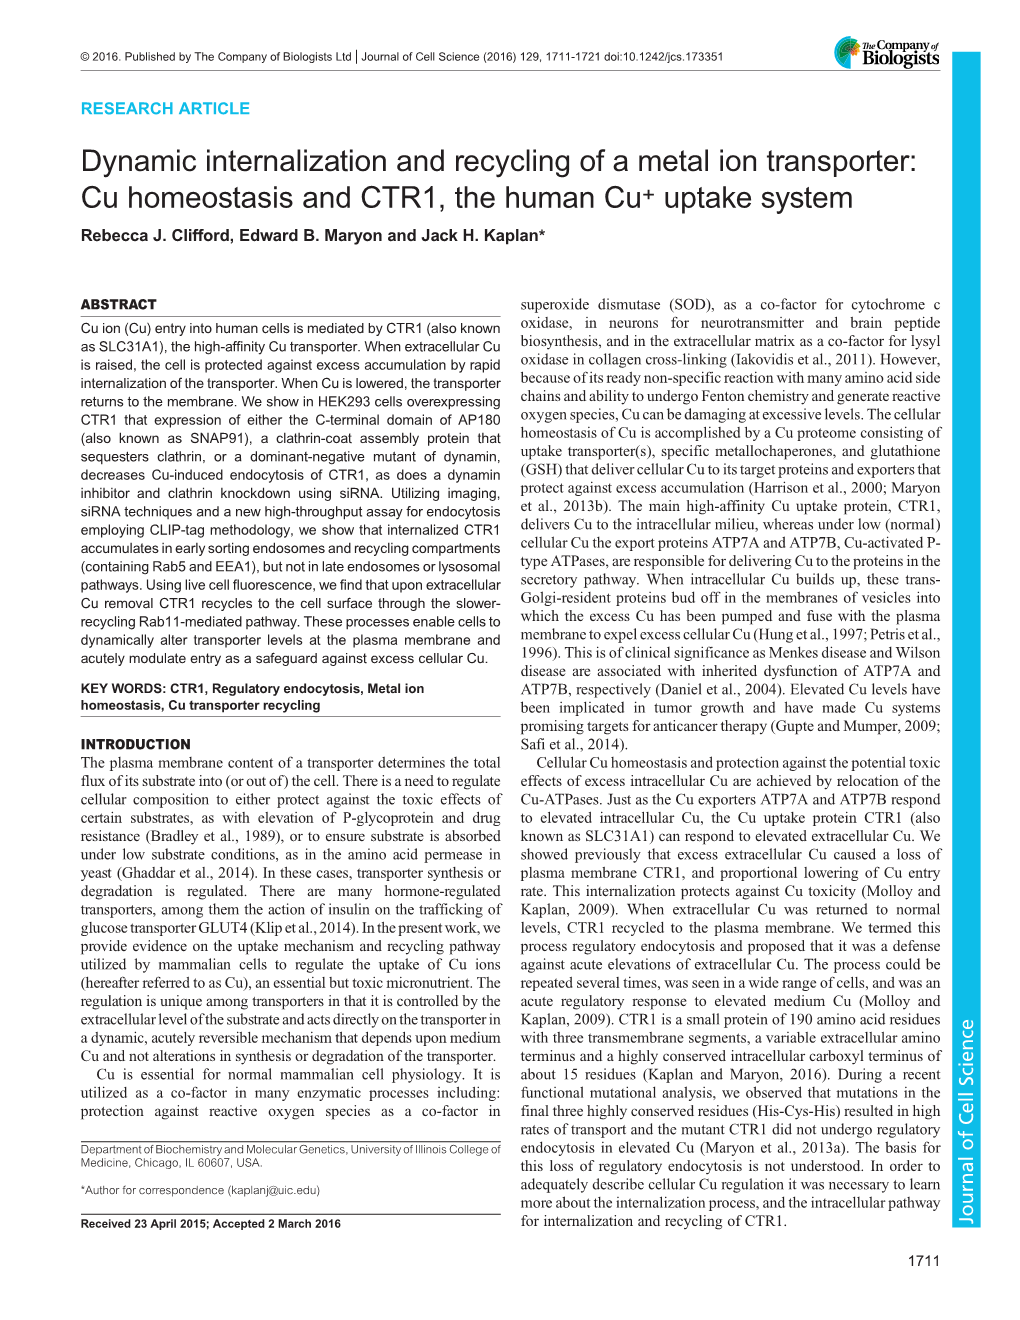 Dynamic Internalization and Recycling of a Metal Ion Transporter: Cu Homeostasis and CTR1, the Human Cu+ Uptake System Rebecca J